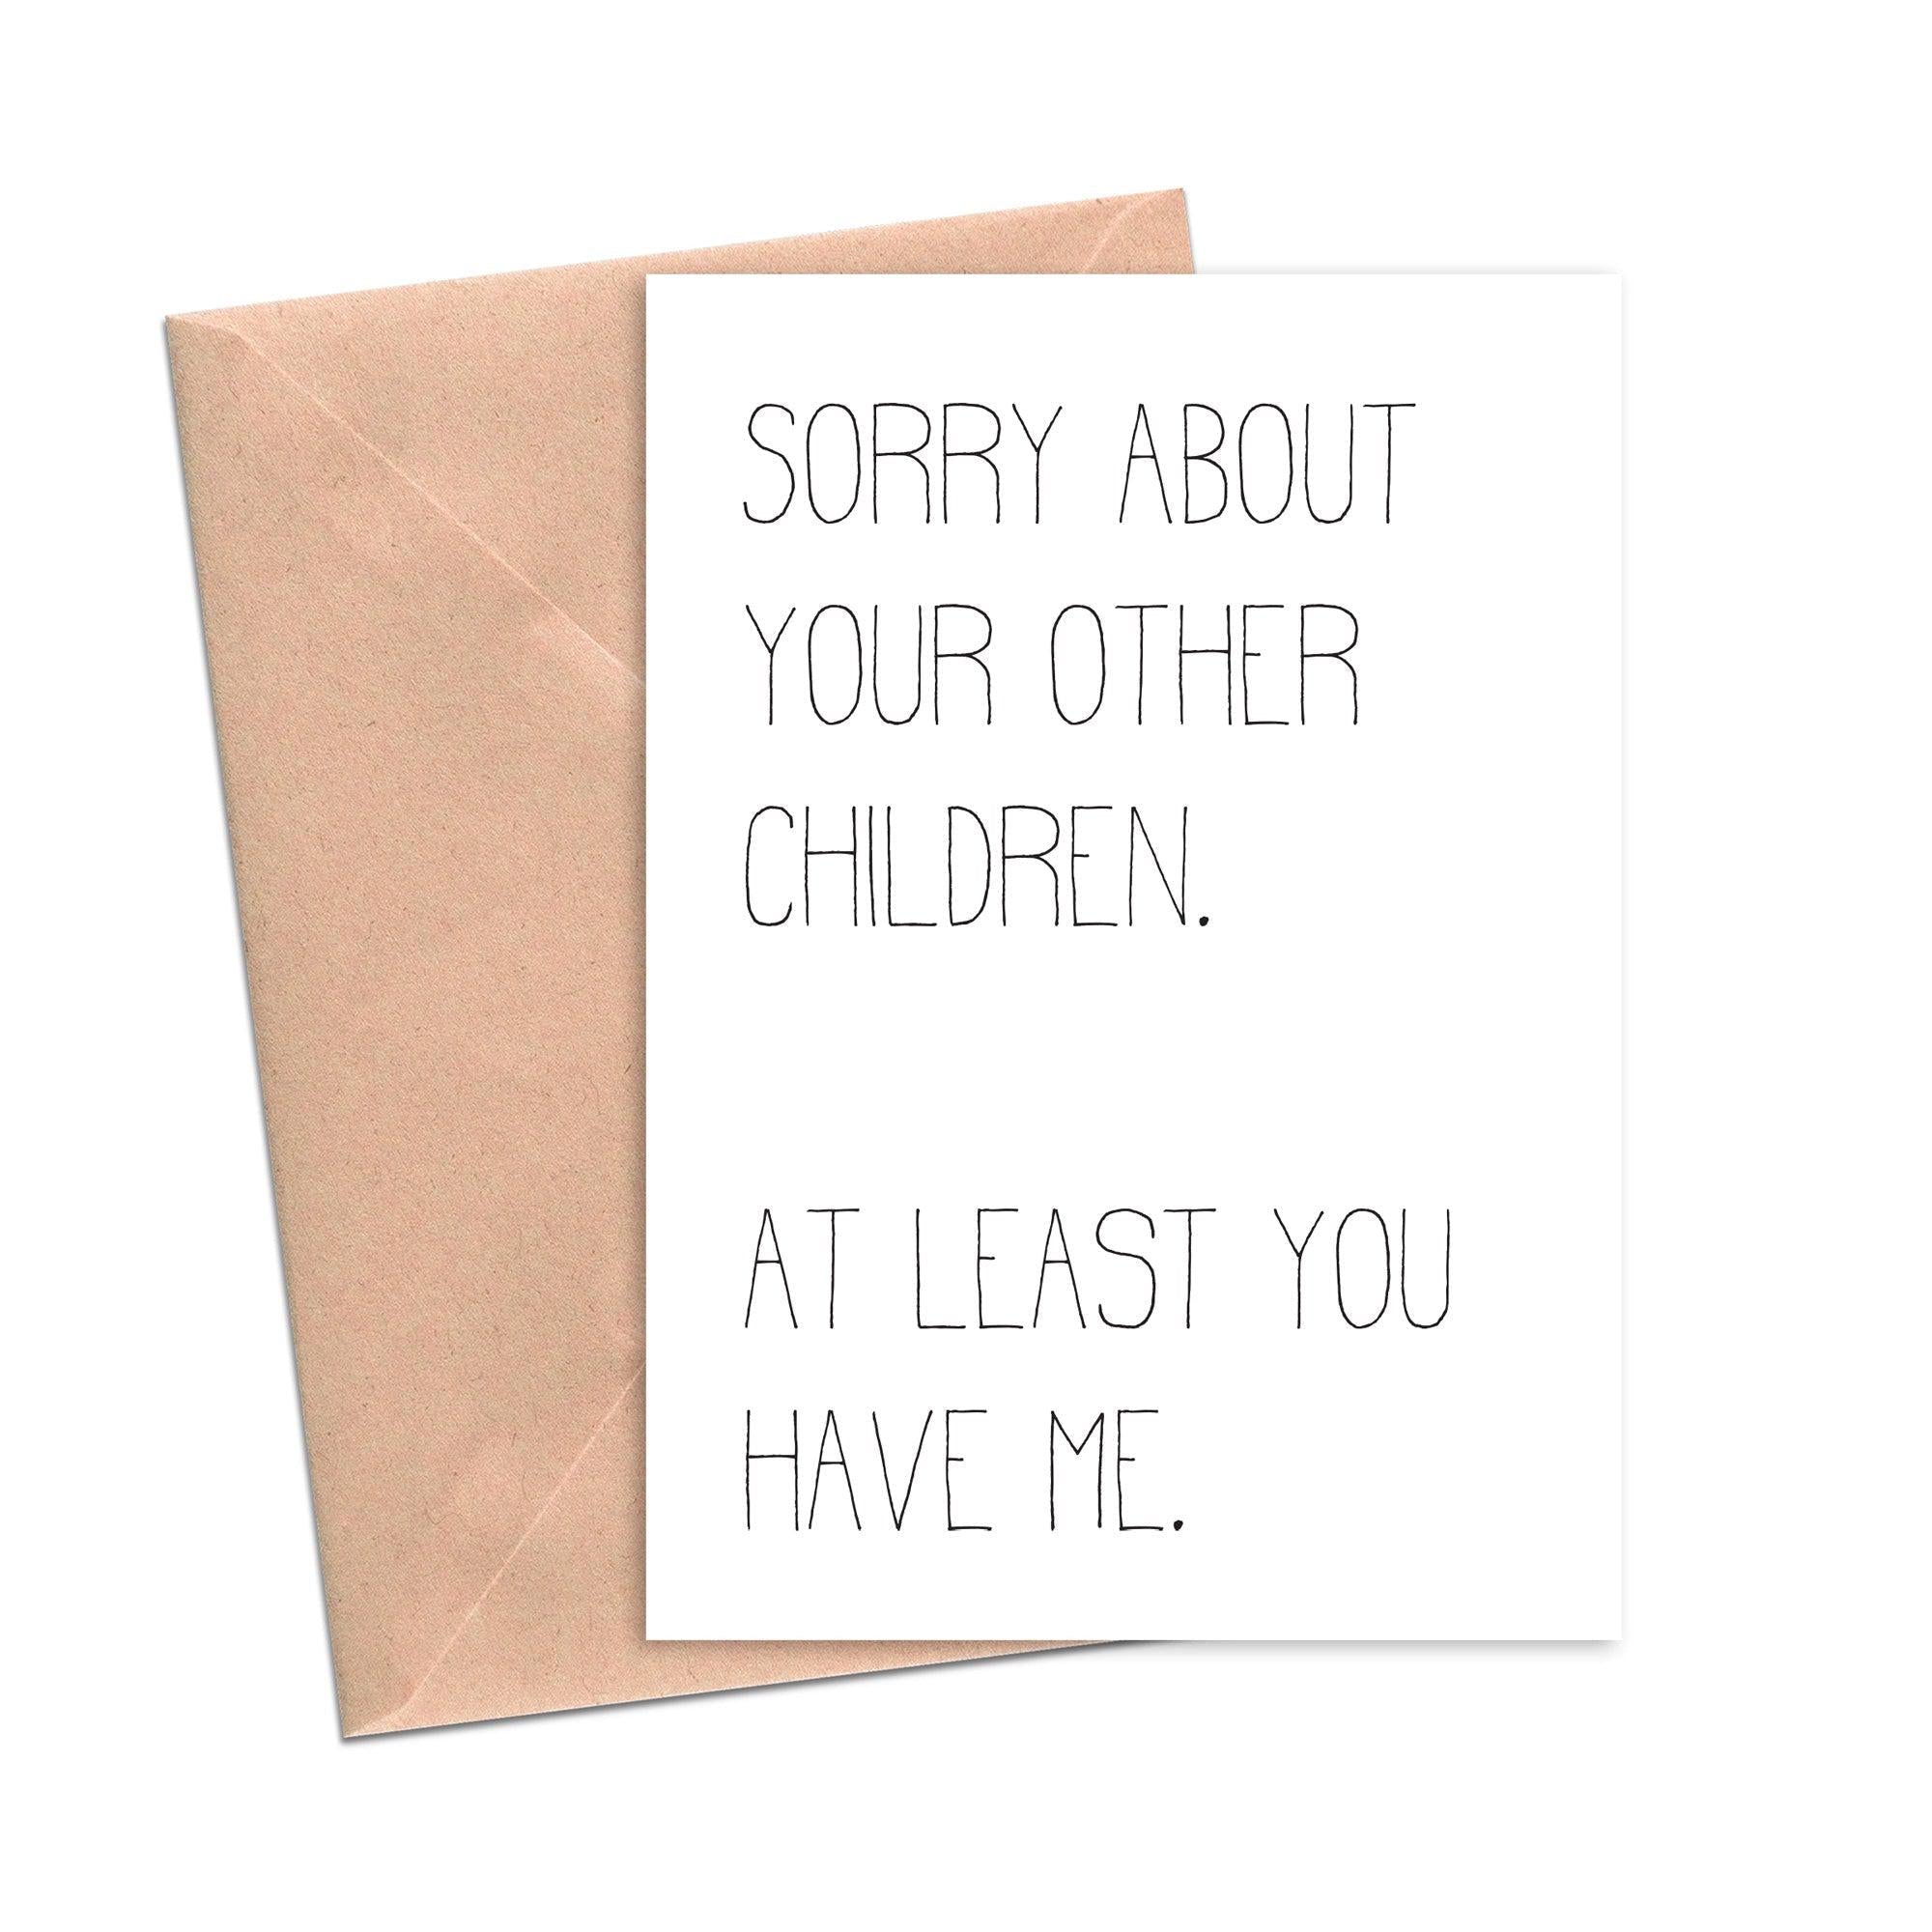 Funny mother gifts from daughter for mothers day Sticker for Sale